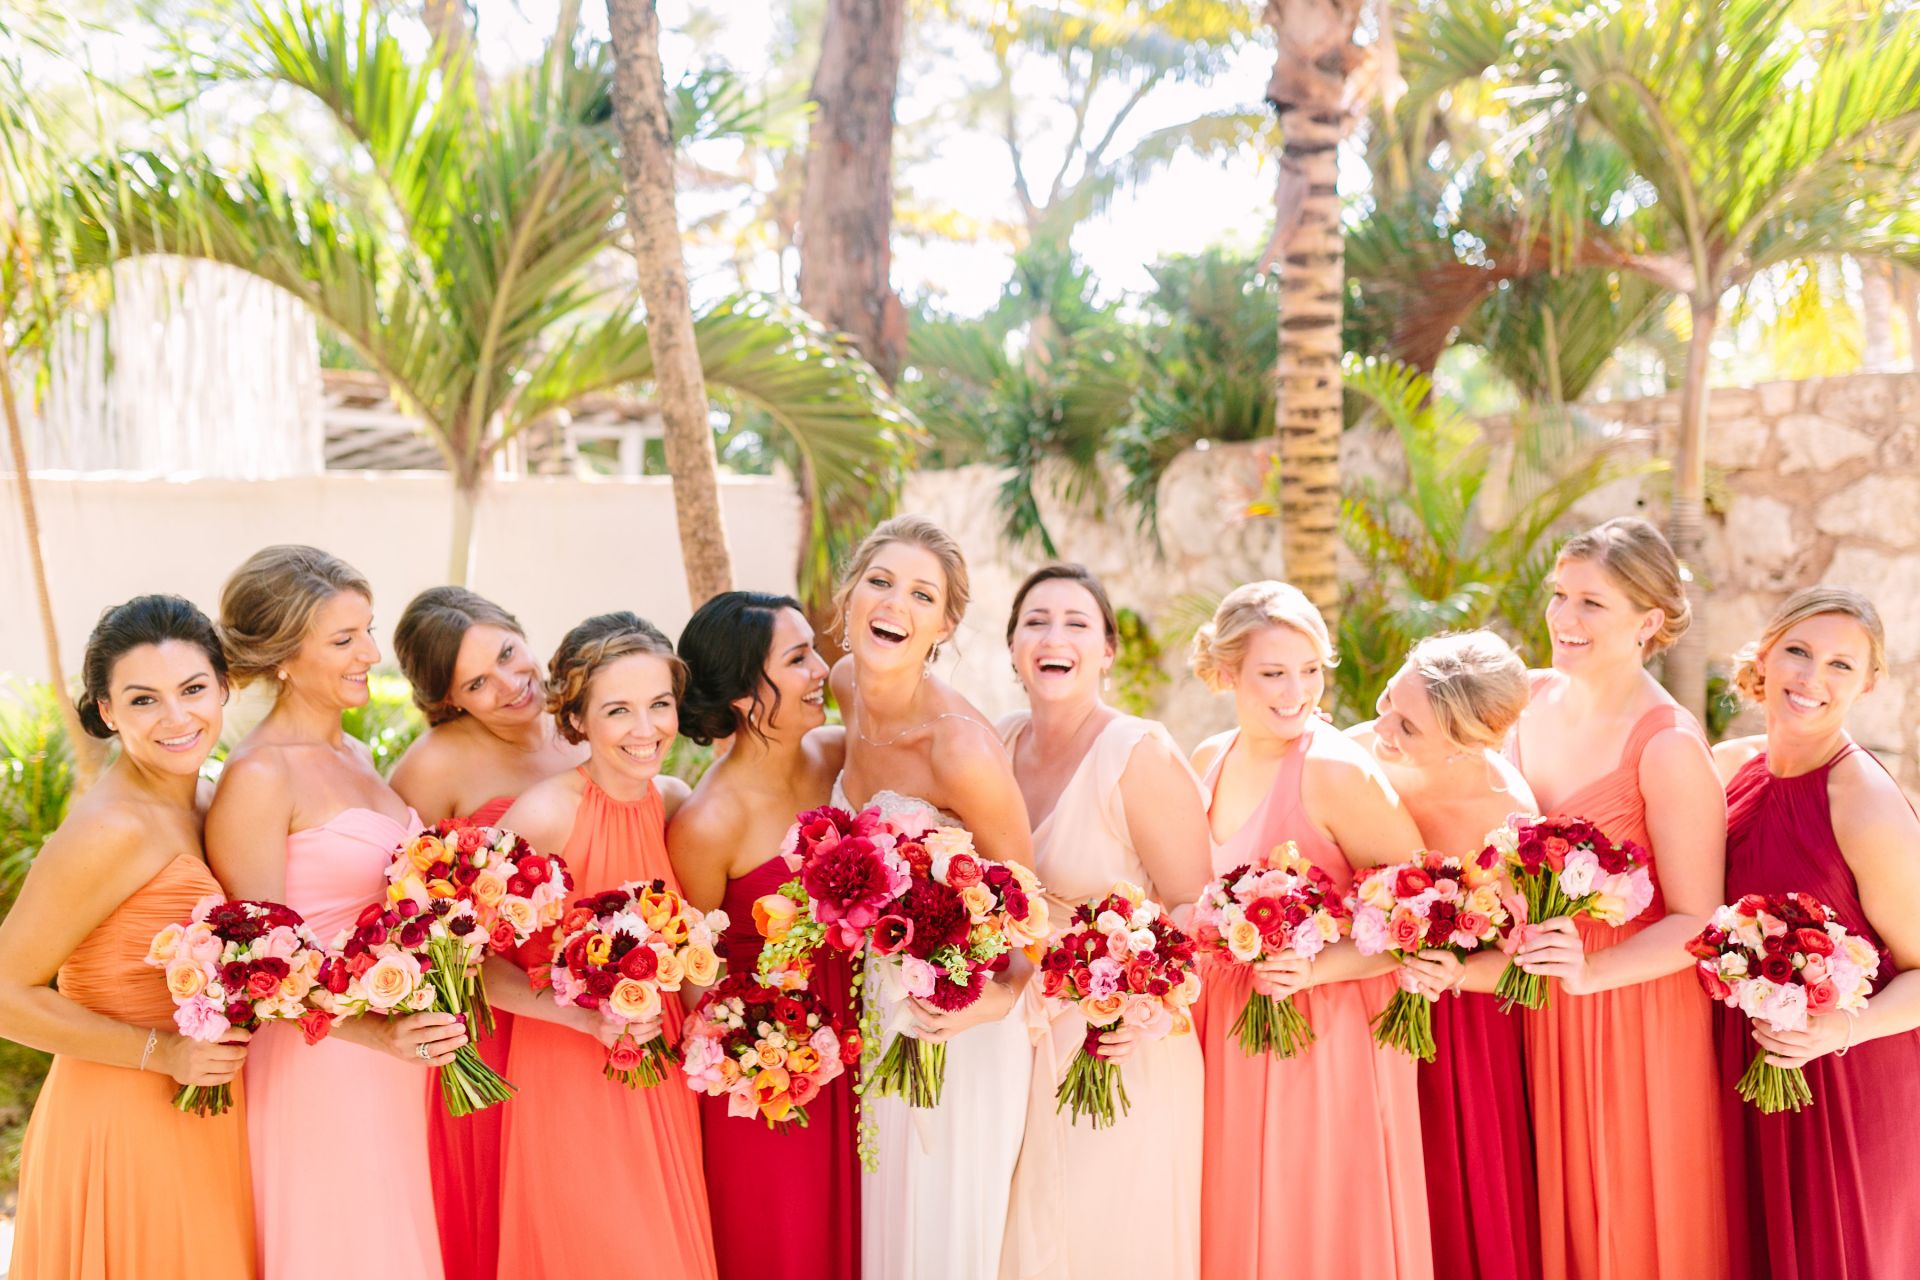 Living Coral bridesmaid dresses inspiration. Check out these amazing 2019 Pantone Color of the Year Wedding Ideas // mysweetengagement.com